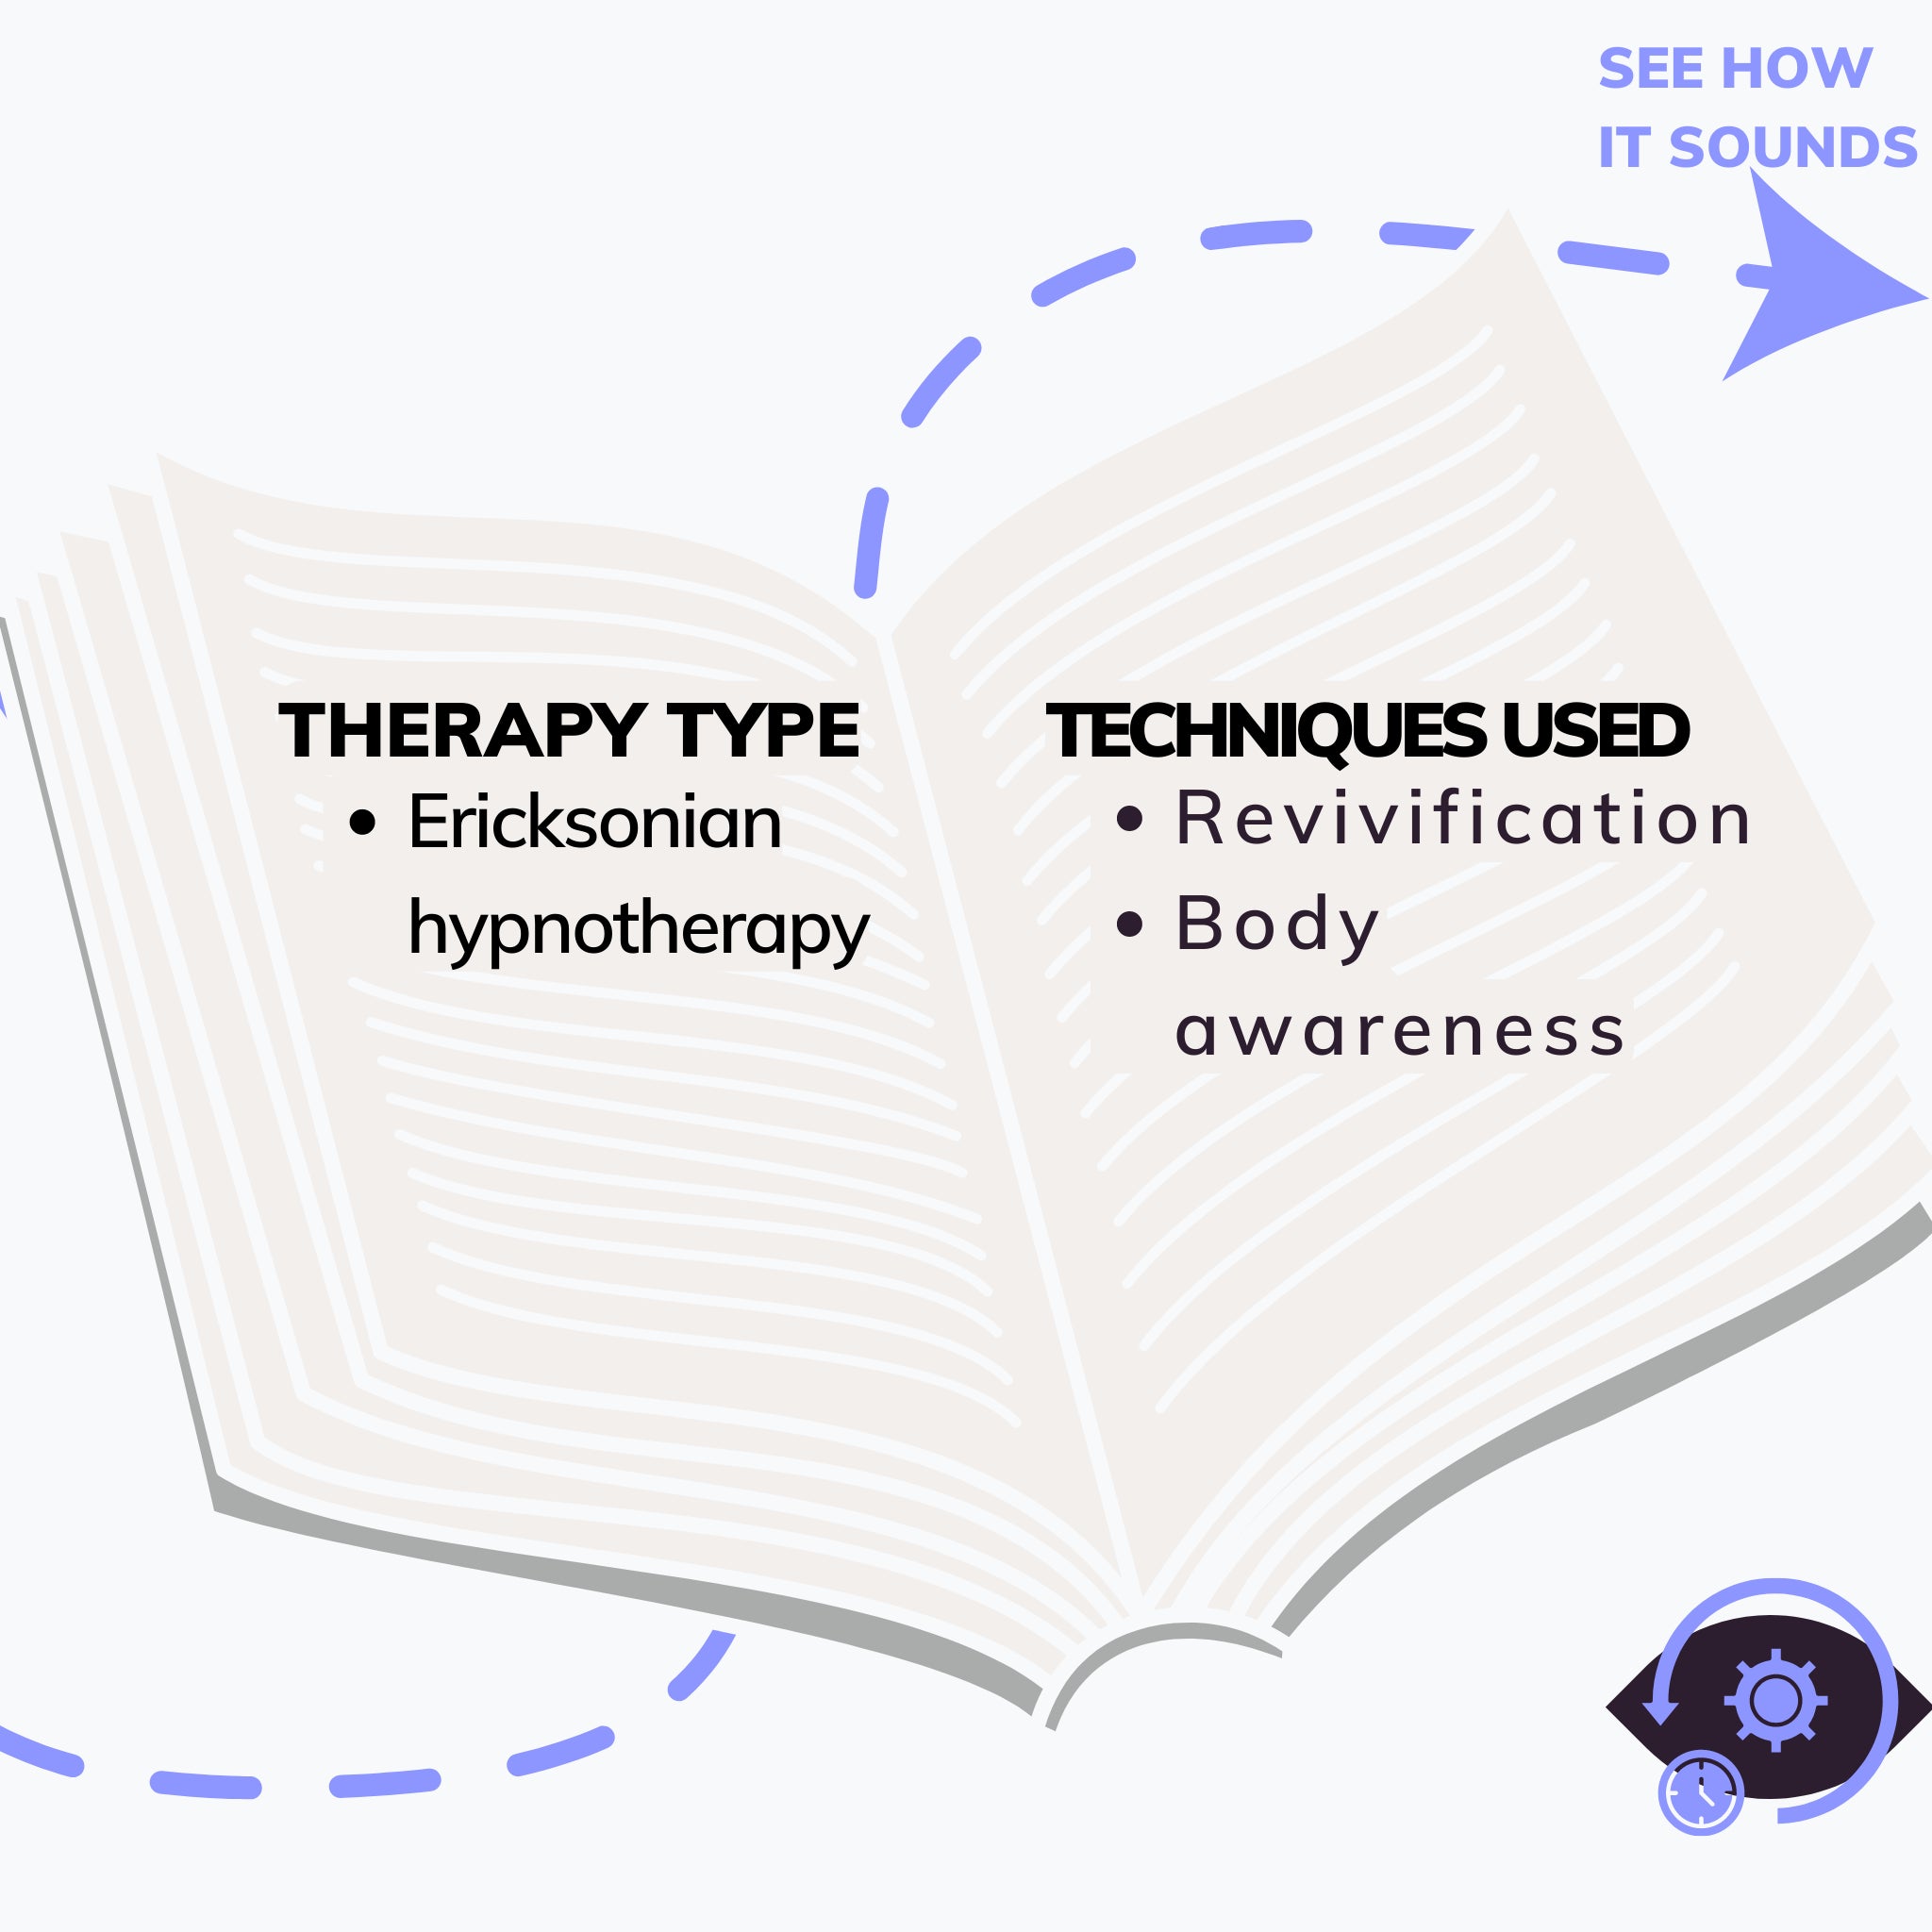 How it's made? Ericksonian hypnotherapy trance that contains techniques for revivification and body awareness